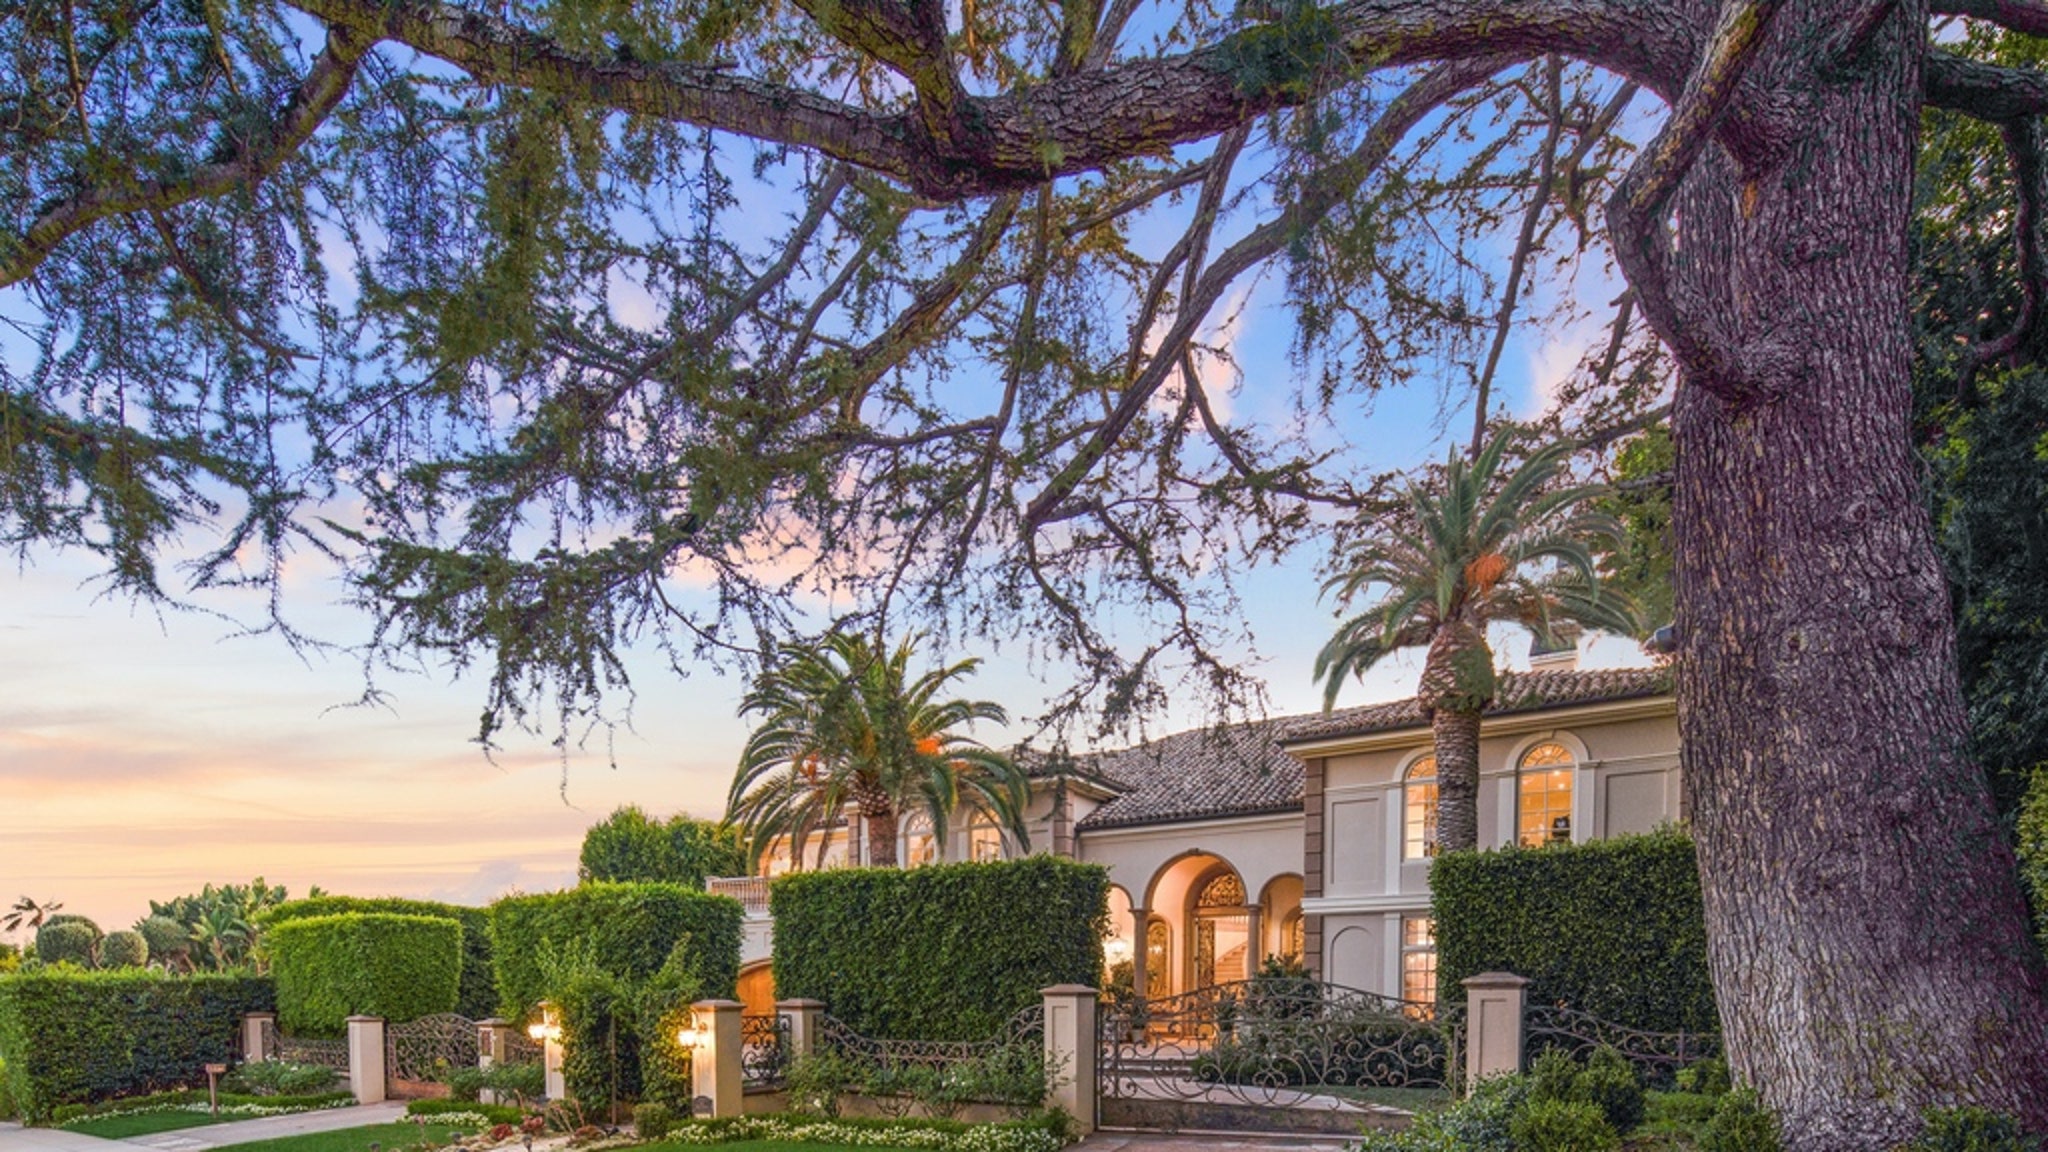 Larry King's Beverly Hills Home